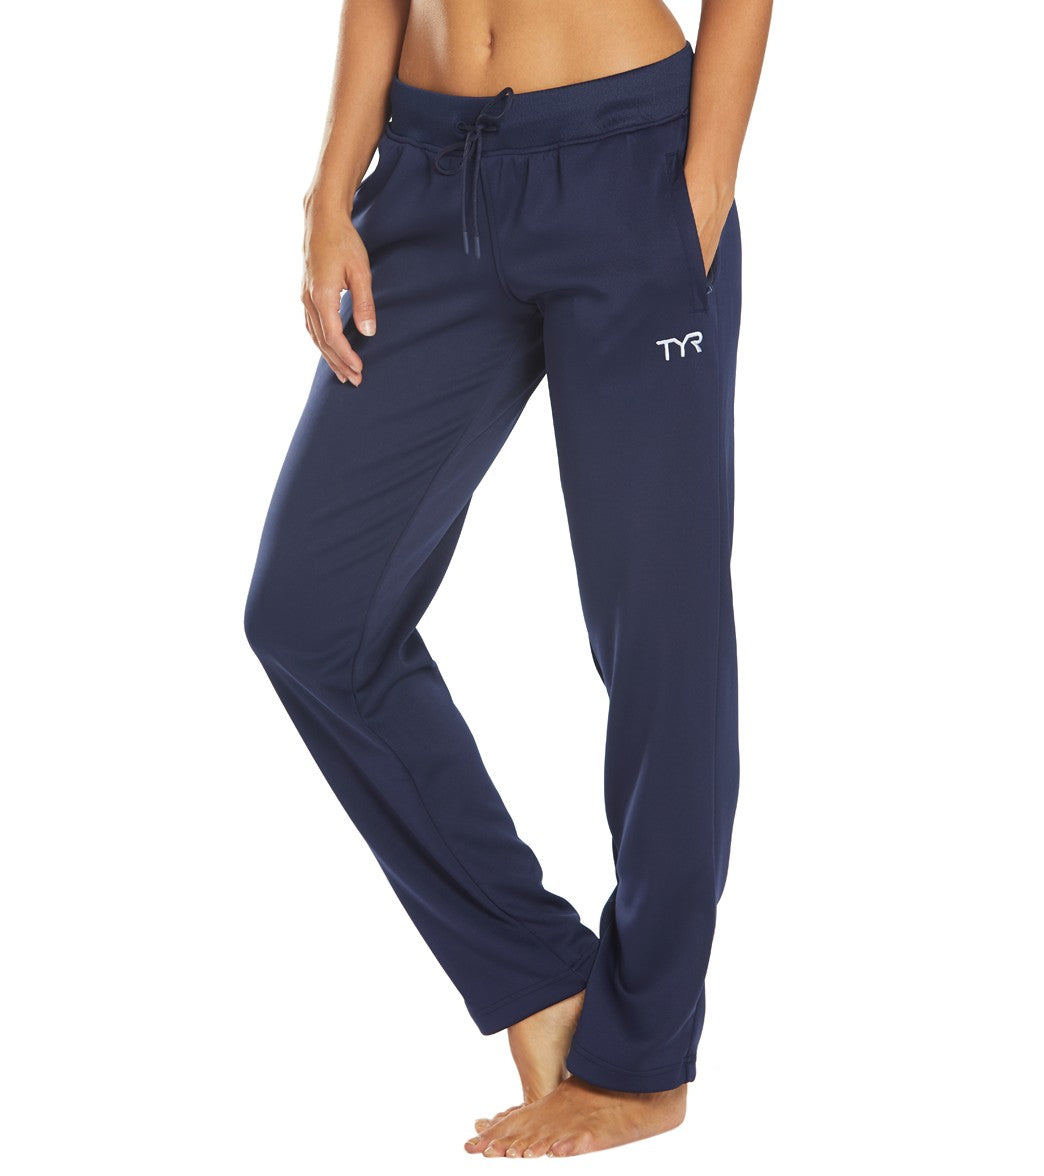 TYR Women's Team Classic Pant at